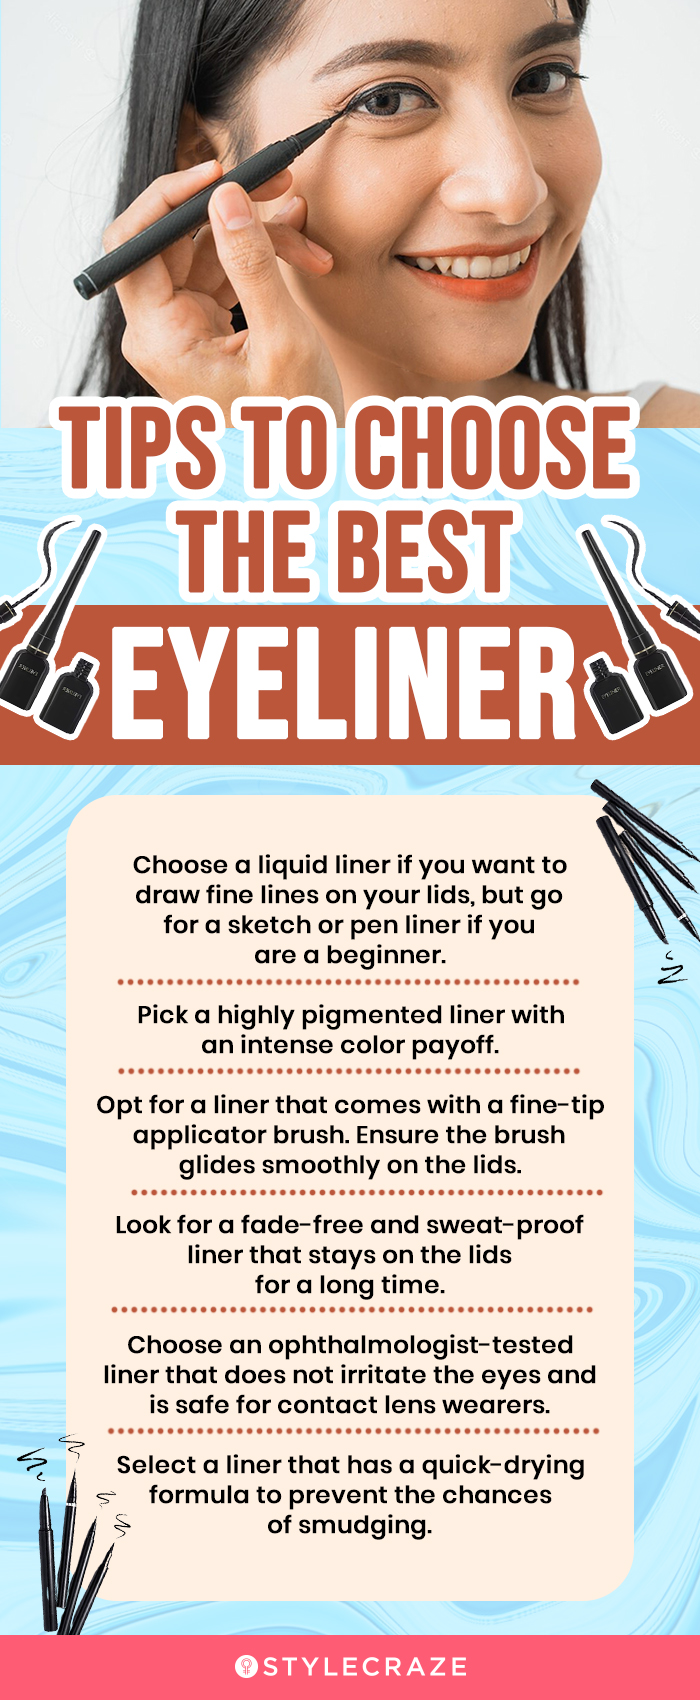 Tips To Choose The Best Eyeliner (infographic)